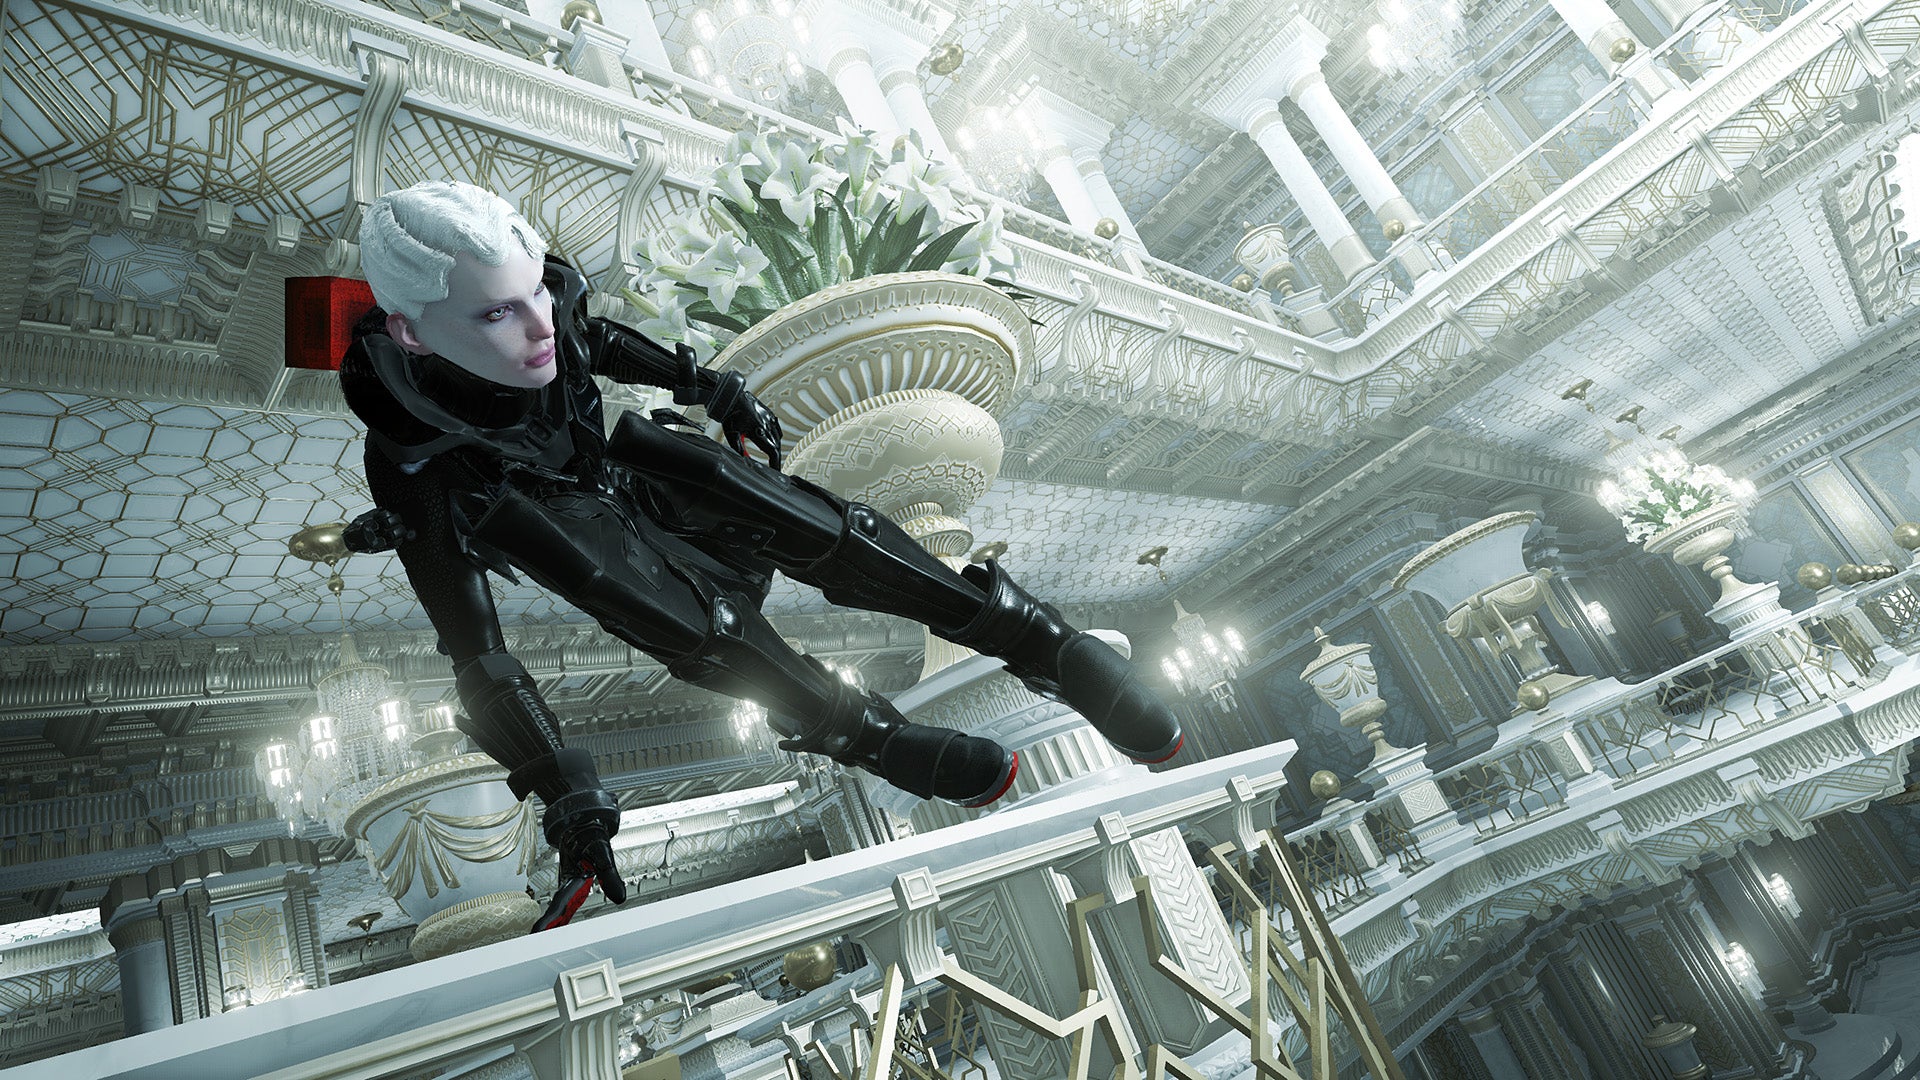 Futuristic character vaulting in opulent, white interior environment.